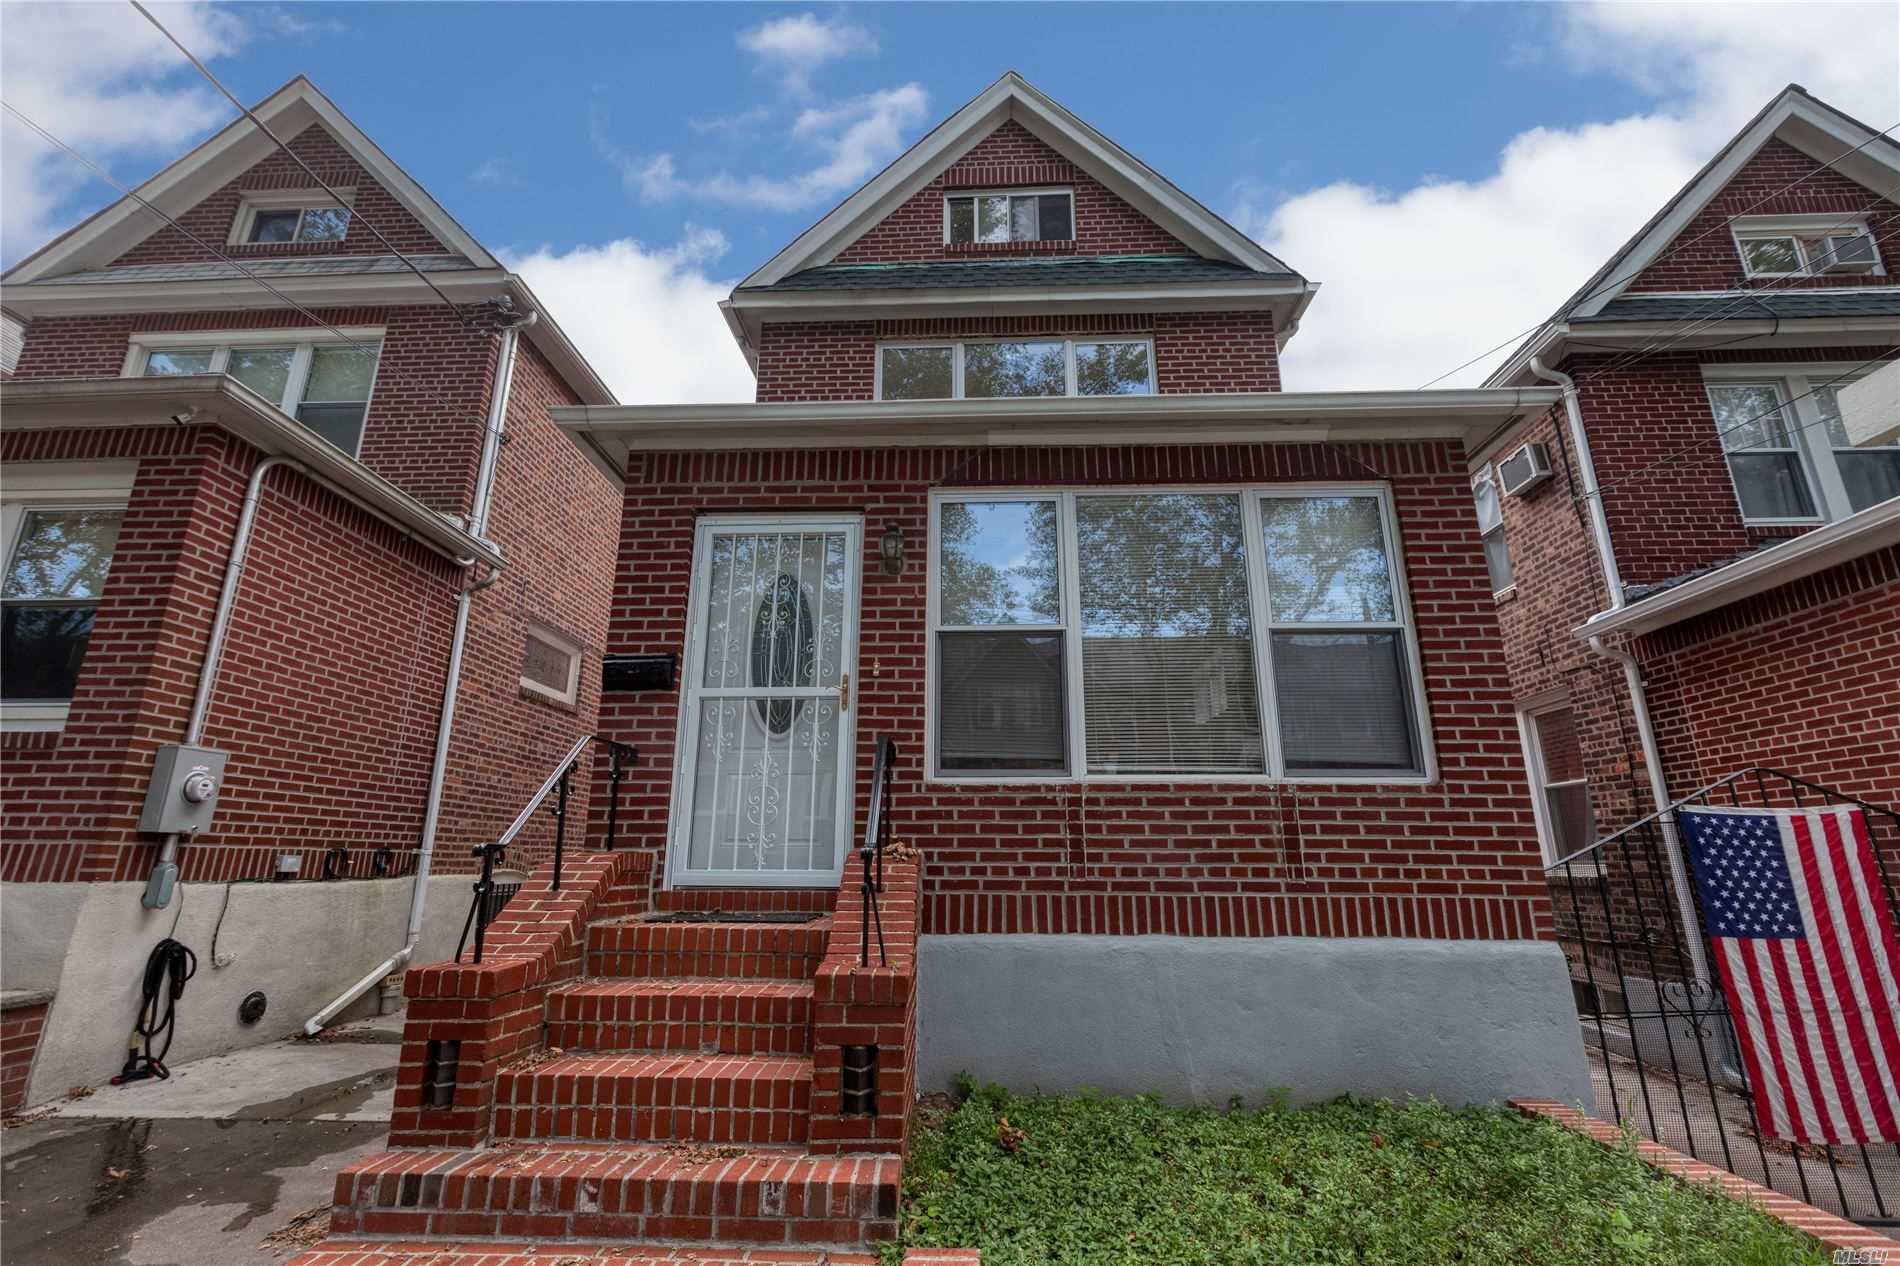 1 Family Brick Home on the Most desired block in Maspeth. It is fully detached and has private driveway.It is convenient to LIE and BQE-just minutes to get into Manhattan or Brooklyn by car.Q18 bus just 1 block away-just a 10 min bus ride to 7 Train.This Home features hardwood floors throughout, open layout kitchen living dining room on 1st floor, 3 bedrooms on 2nd floor, full standup attic , Full finished basement with 8ft. ceilings, brand new boiler and hot water heater, Patio with garden & More!